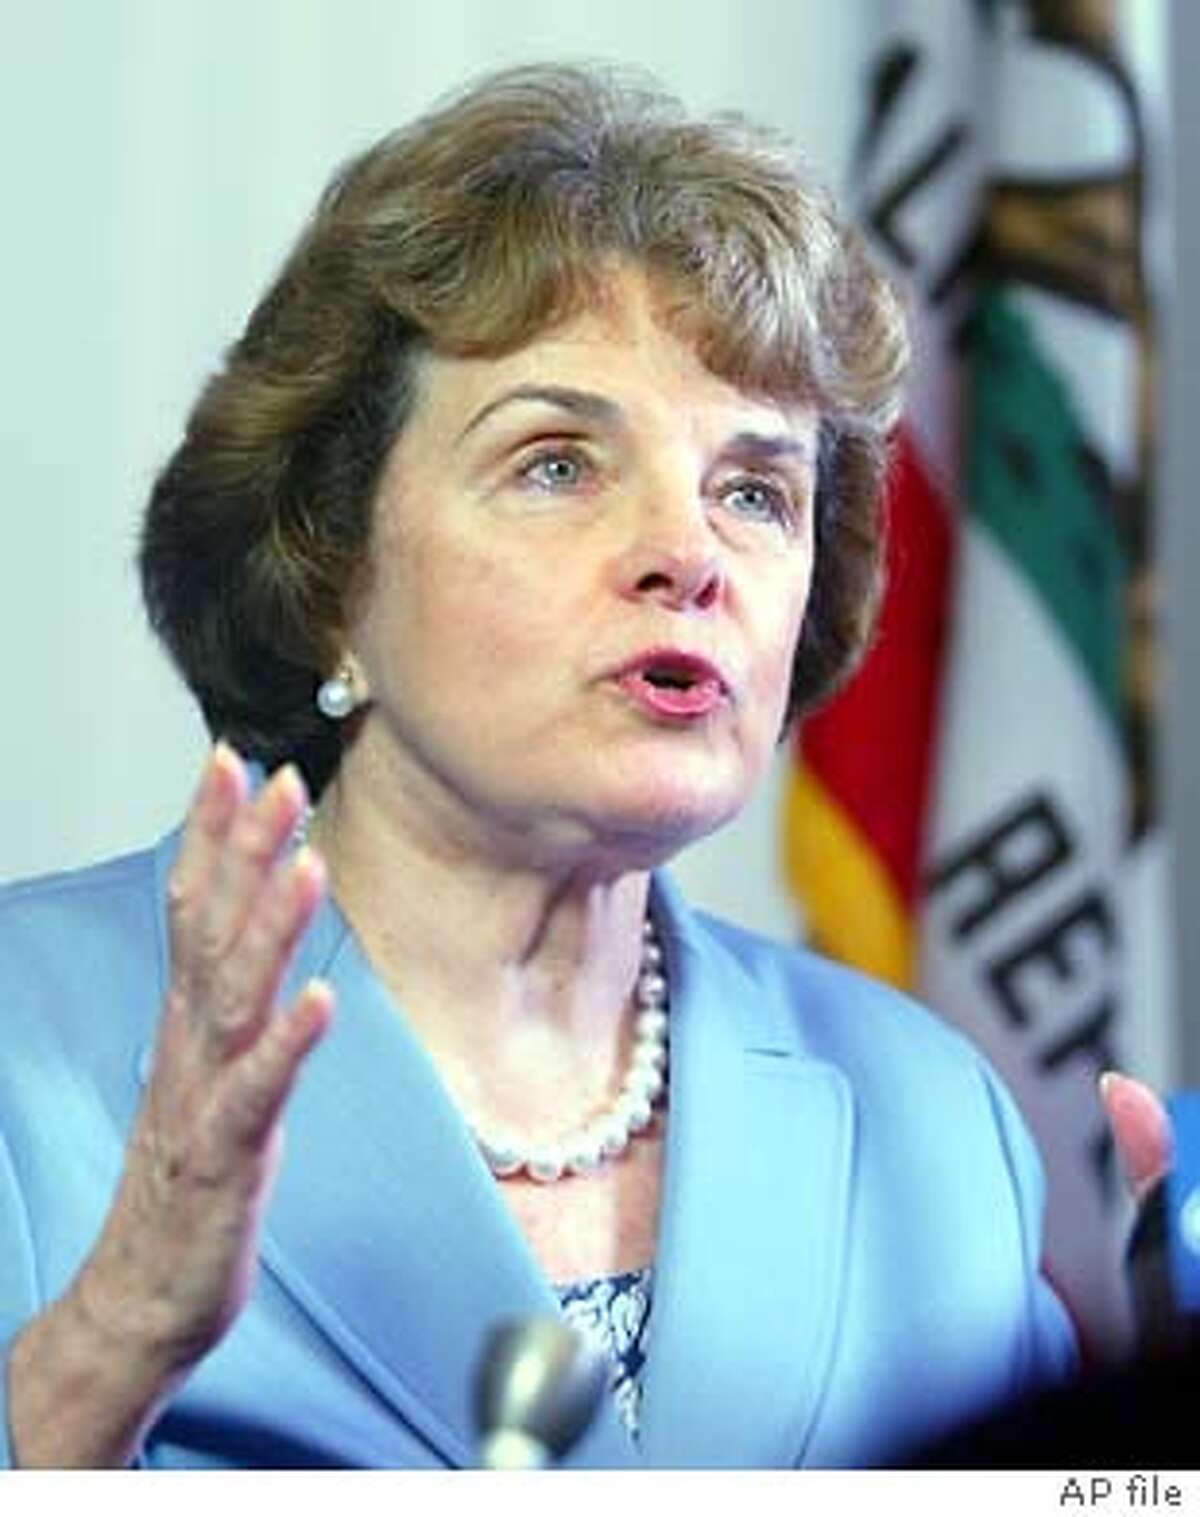 Sen. Dianne Feinstein, D-Calif., discusses the recall vote at her offices in San Francisco, Wednesday, Oct. 8, 2003. (AP Photo/George Nitikin) ALSO RAN 11/26/2003 Sen. Dianne Feinstein called the actions by the financial industry diabolical. Photo caption privacy22_PH1097107200APSen. Dianne Feinstein, D-Calif., discusses the recall vote at her offices in San Francisco, Wednesday, Oct. 8, 2003. (AP Photo-George Nitikin) Dianne Feinstein warned that the country appears arrogant. Dianne Feinstein warned that the country appears arrogant. Politics#MainNews#Chronicle#11/4/2003#ALL#5star#A14#0421429744 Sens. Dianne Feinstein (left) and Barbara Boxer fought for the state's privacy law. Nation#MainNews#Chronicle#11/6/2003#ALL#3star##0421429744 Sen. Dianne Feinstein, seeking to renew her weapons ban, says tougher laws have no chance.